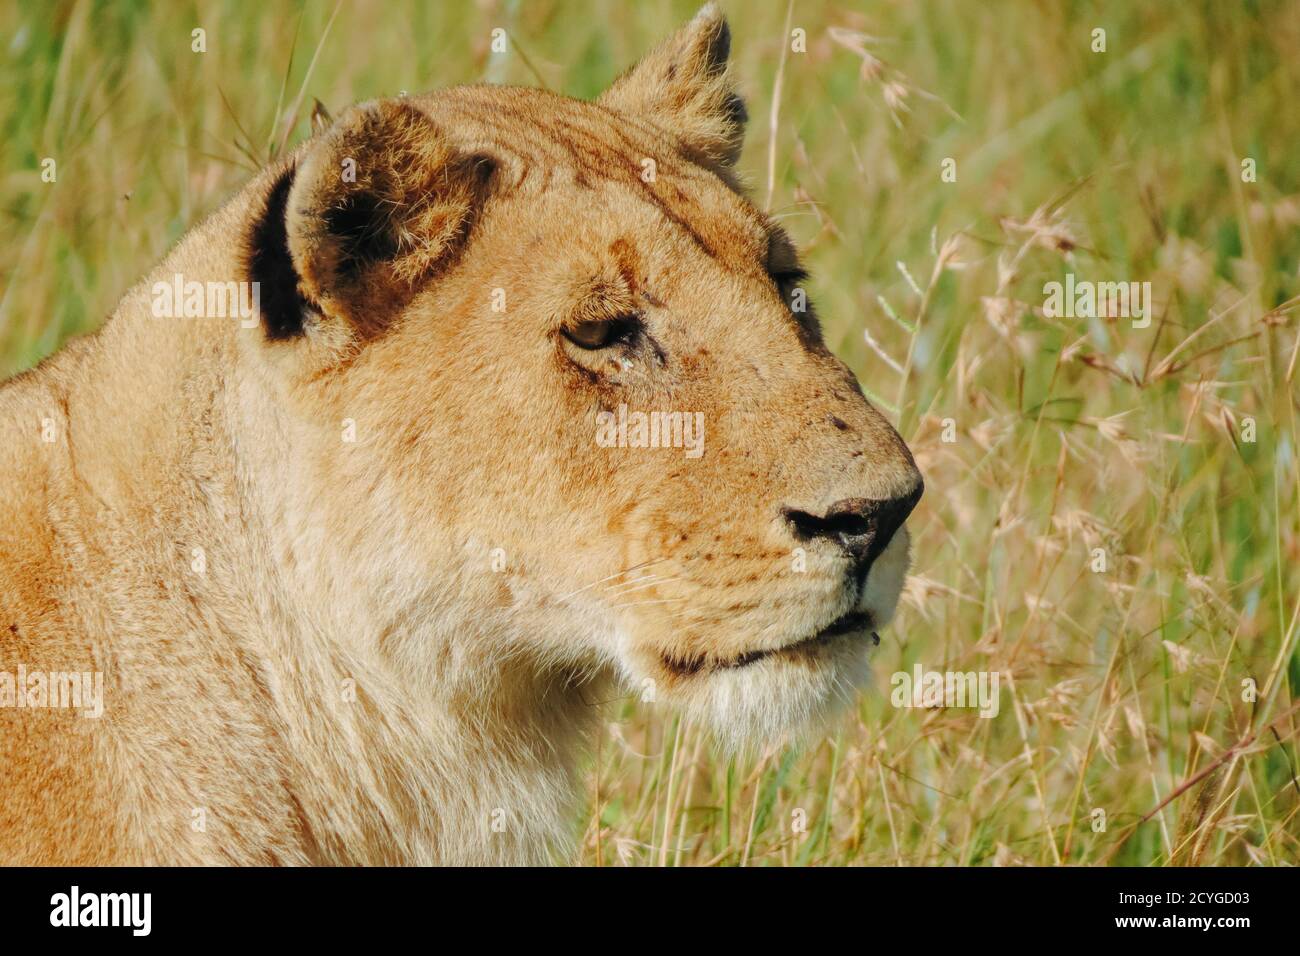 African lioness in the grass in Masai Mara National Reserve, Kenya. Stock Photo